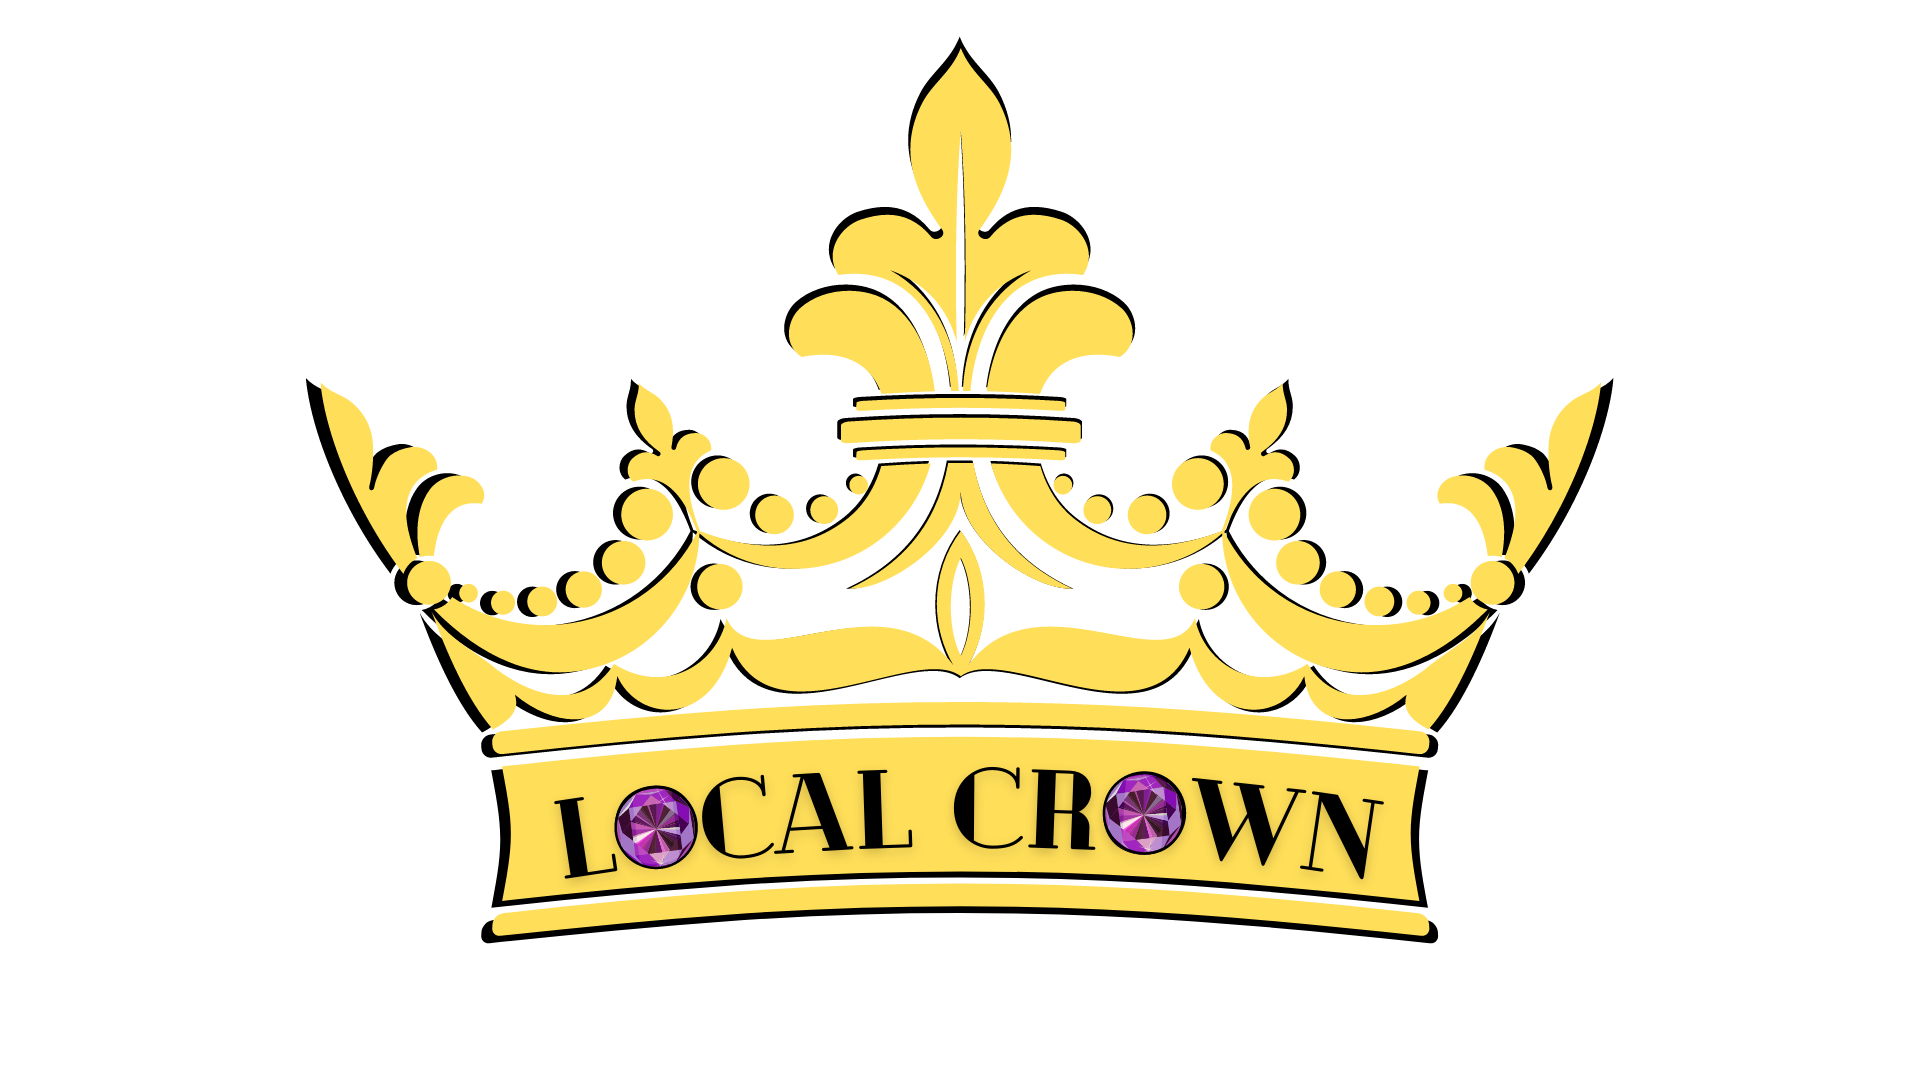 Local Crown, LLC was created to help business owners claim their crown online while focusing on what they do best. Local Crown brings business owners the growth solutions they need from social media marketing to SEO and web design they have you covered.